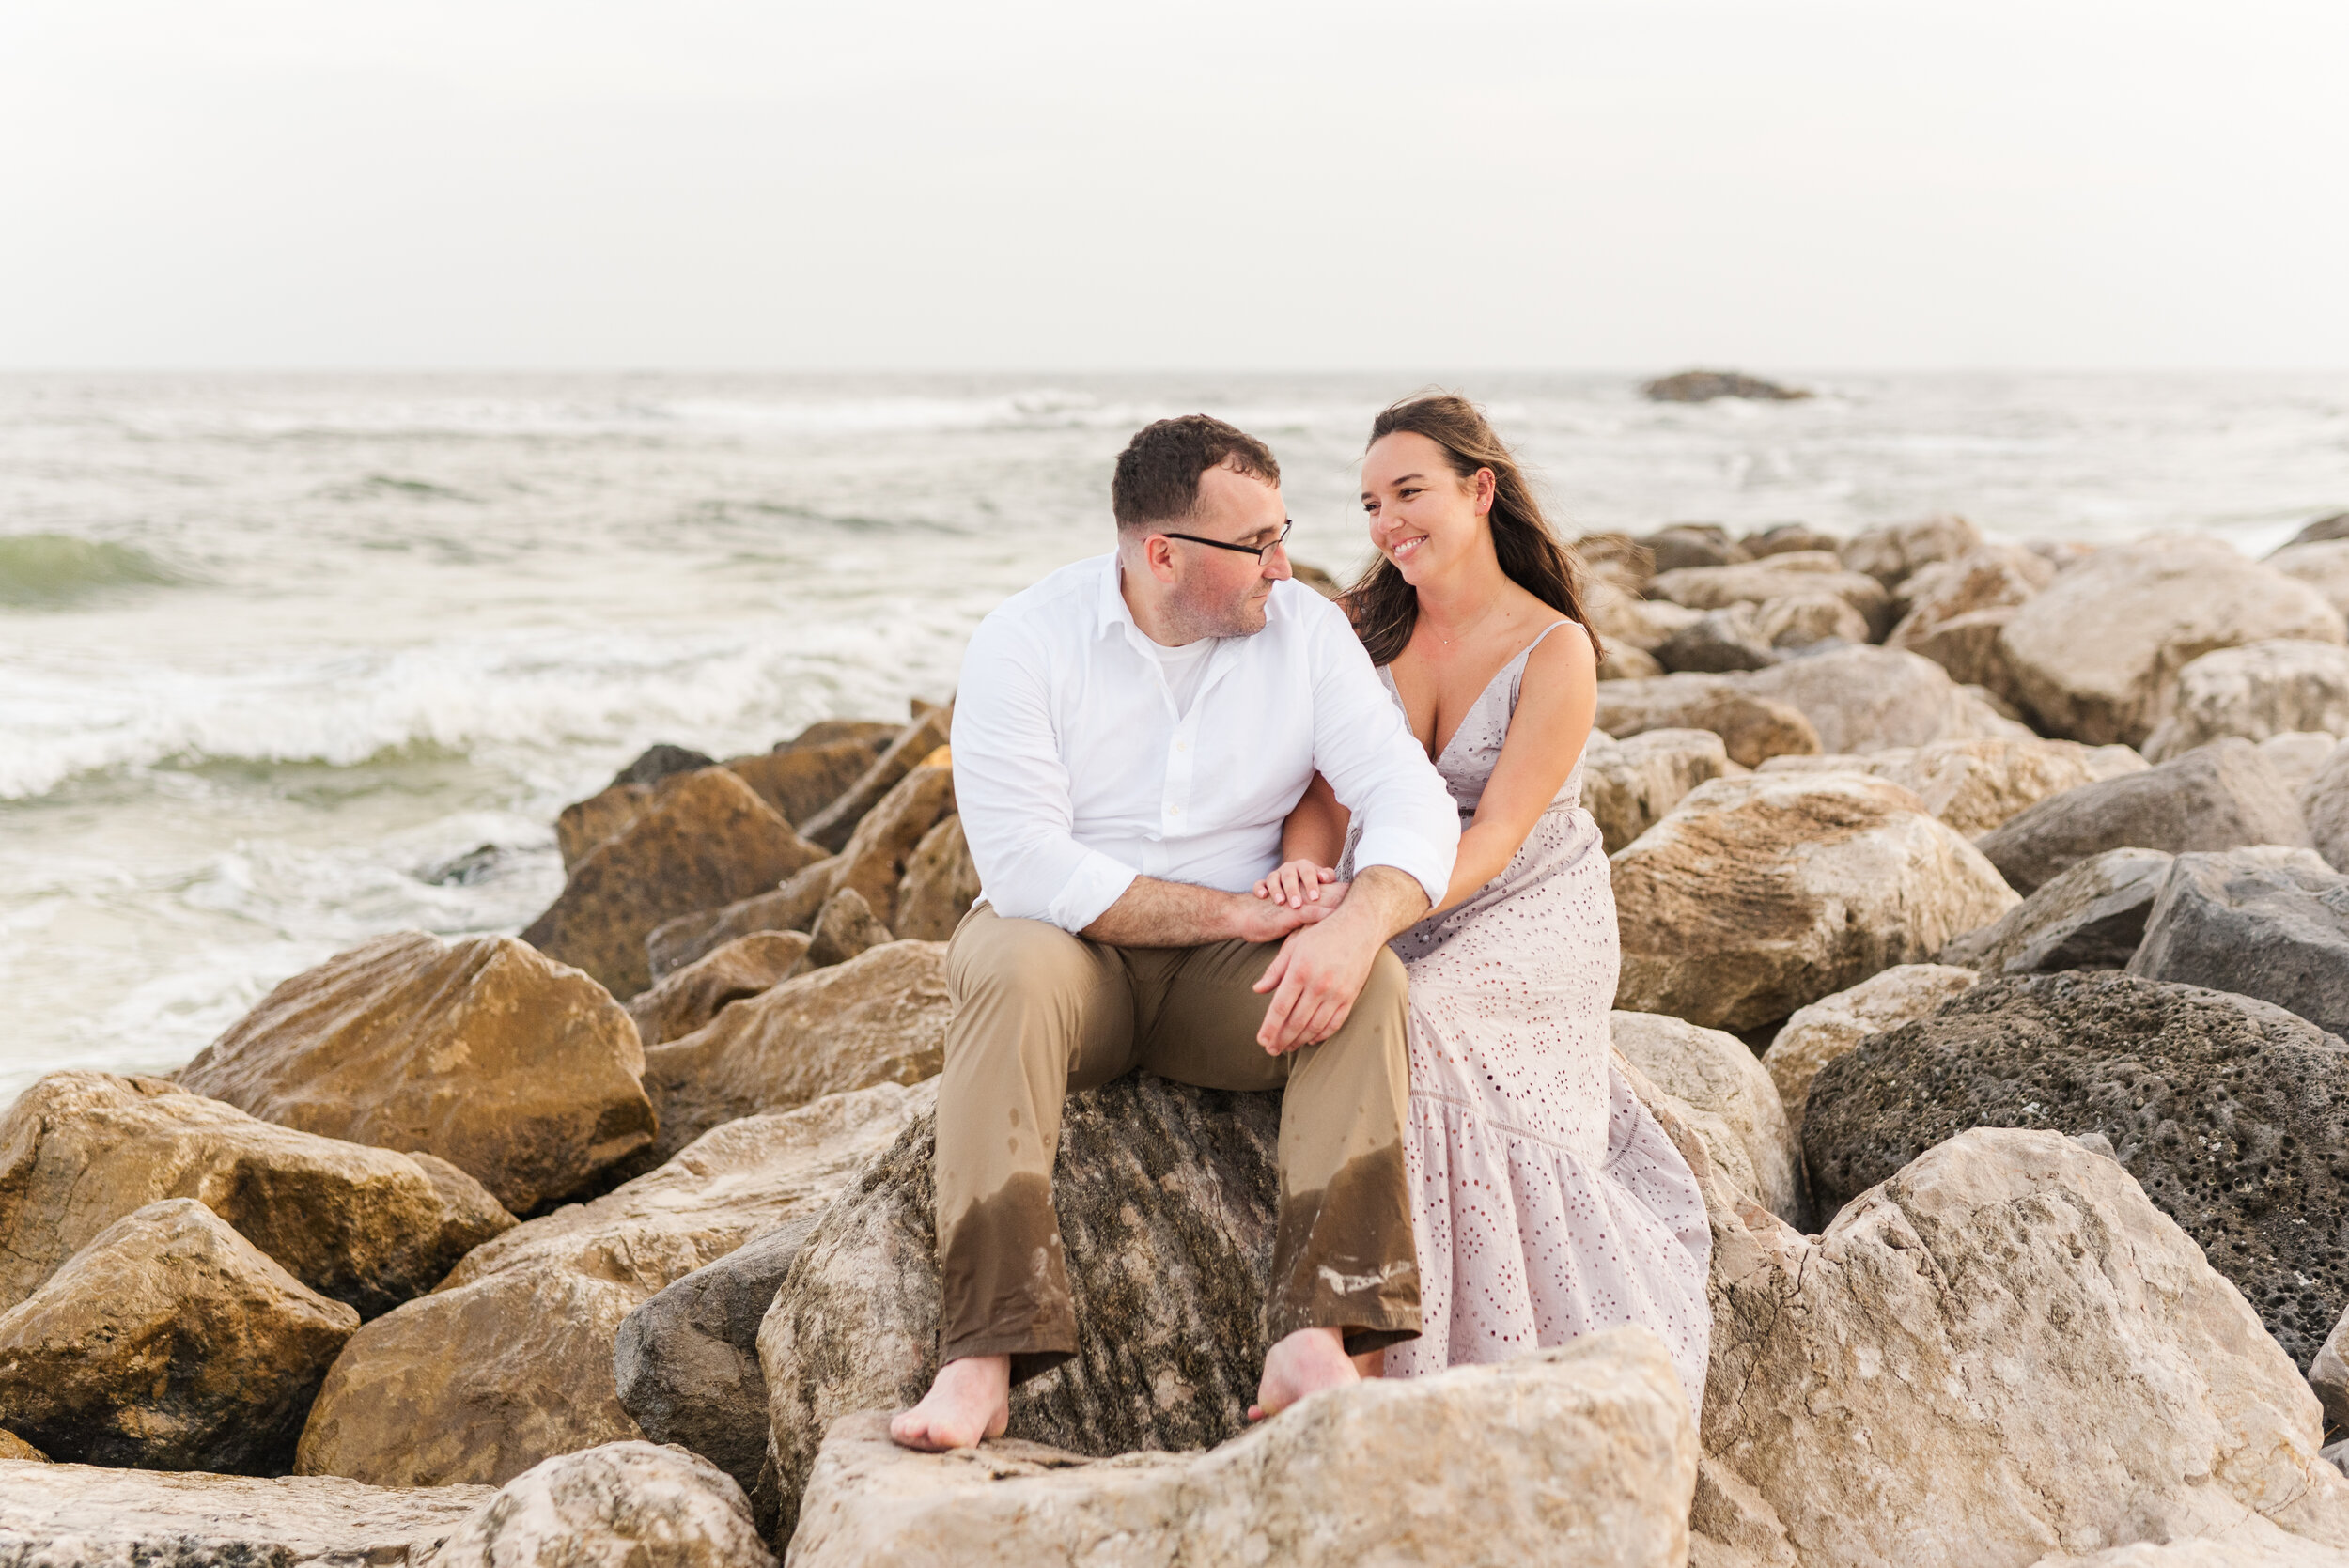 Orange Beach Couples Portrait Photoshoot in August Photographed by Kristen Marcus Photography